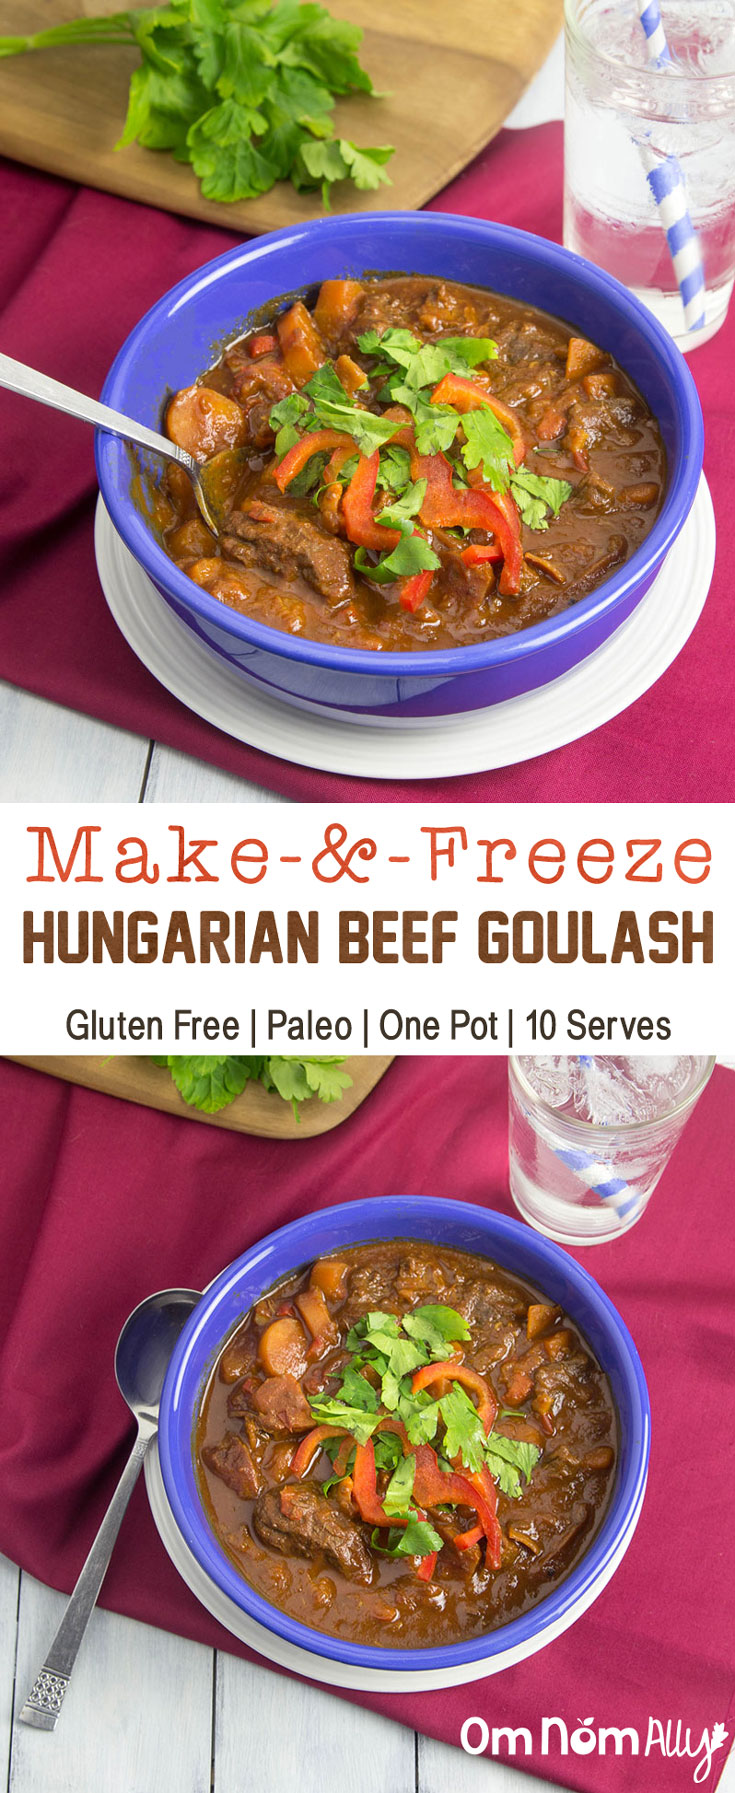 Make-&-Freeze Hungarian Beef Goulash @OmNomAlly - This one pot meal is Paleo, Gluten-free and makes 10 serves for your freezer - dinner is sorted!